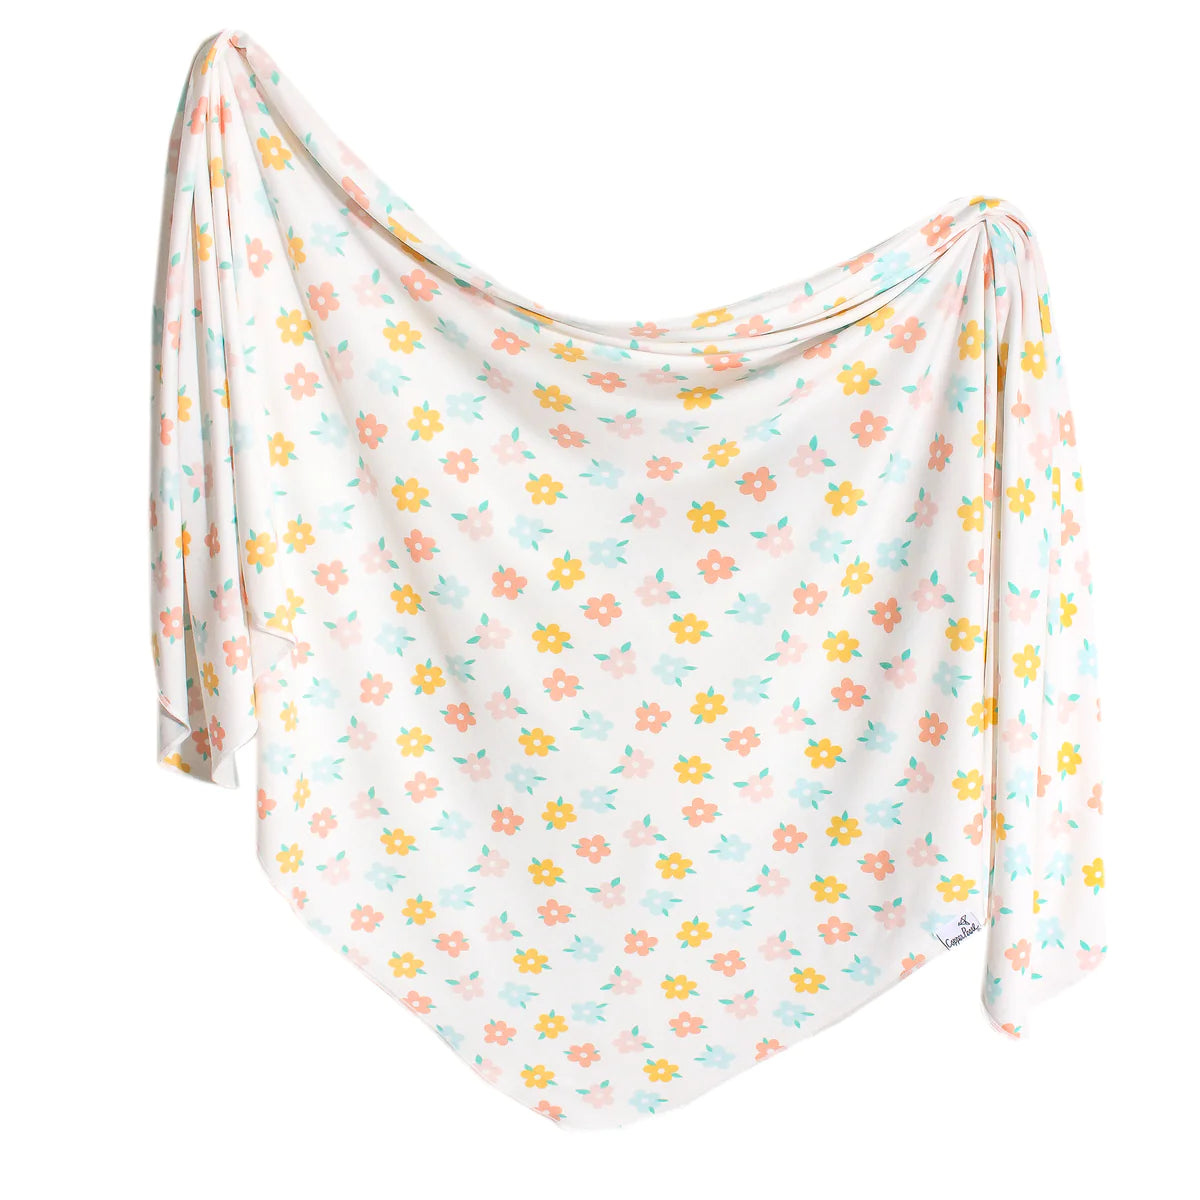 Copper Pearl Daisy Swaddle Blanket